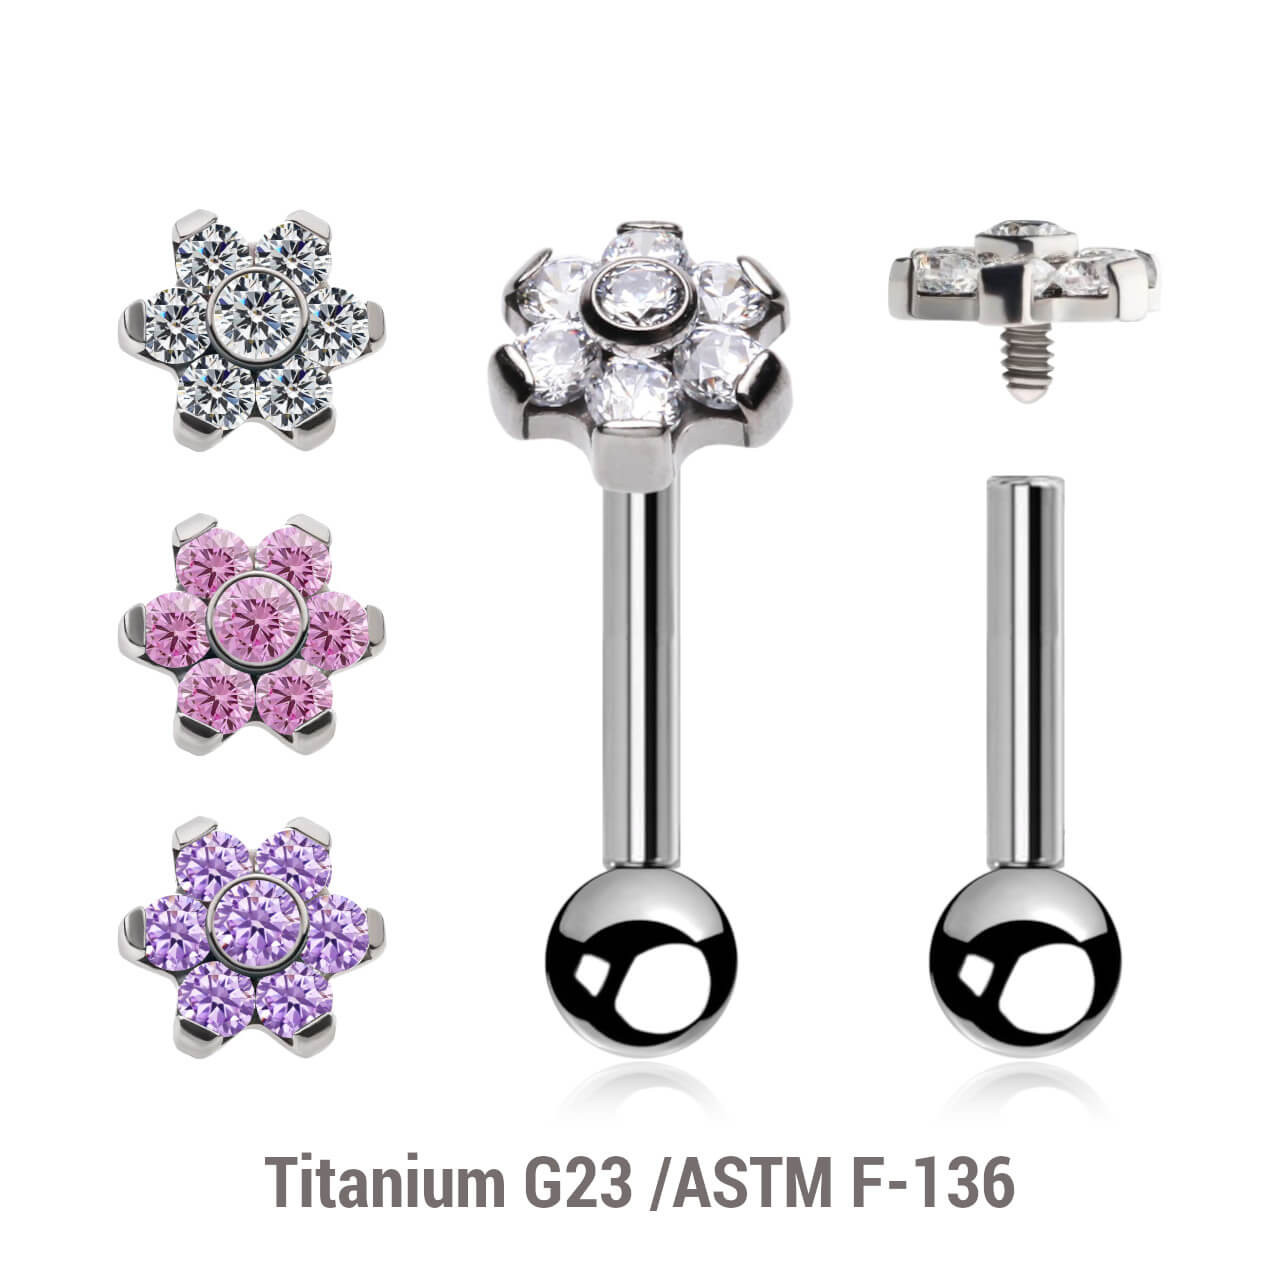 YBA12X01 Pack of 5 high polished titanium internally threaded tragus barbells, Thickness 1.2mm, with 5mm flower shaped top with prong set CZ stones (1 central stone + 6 stones around) and a lower 3mm plain ball